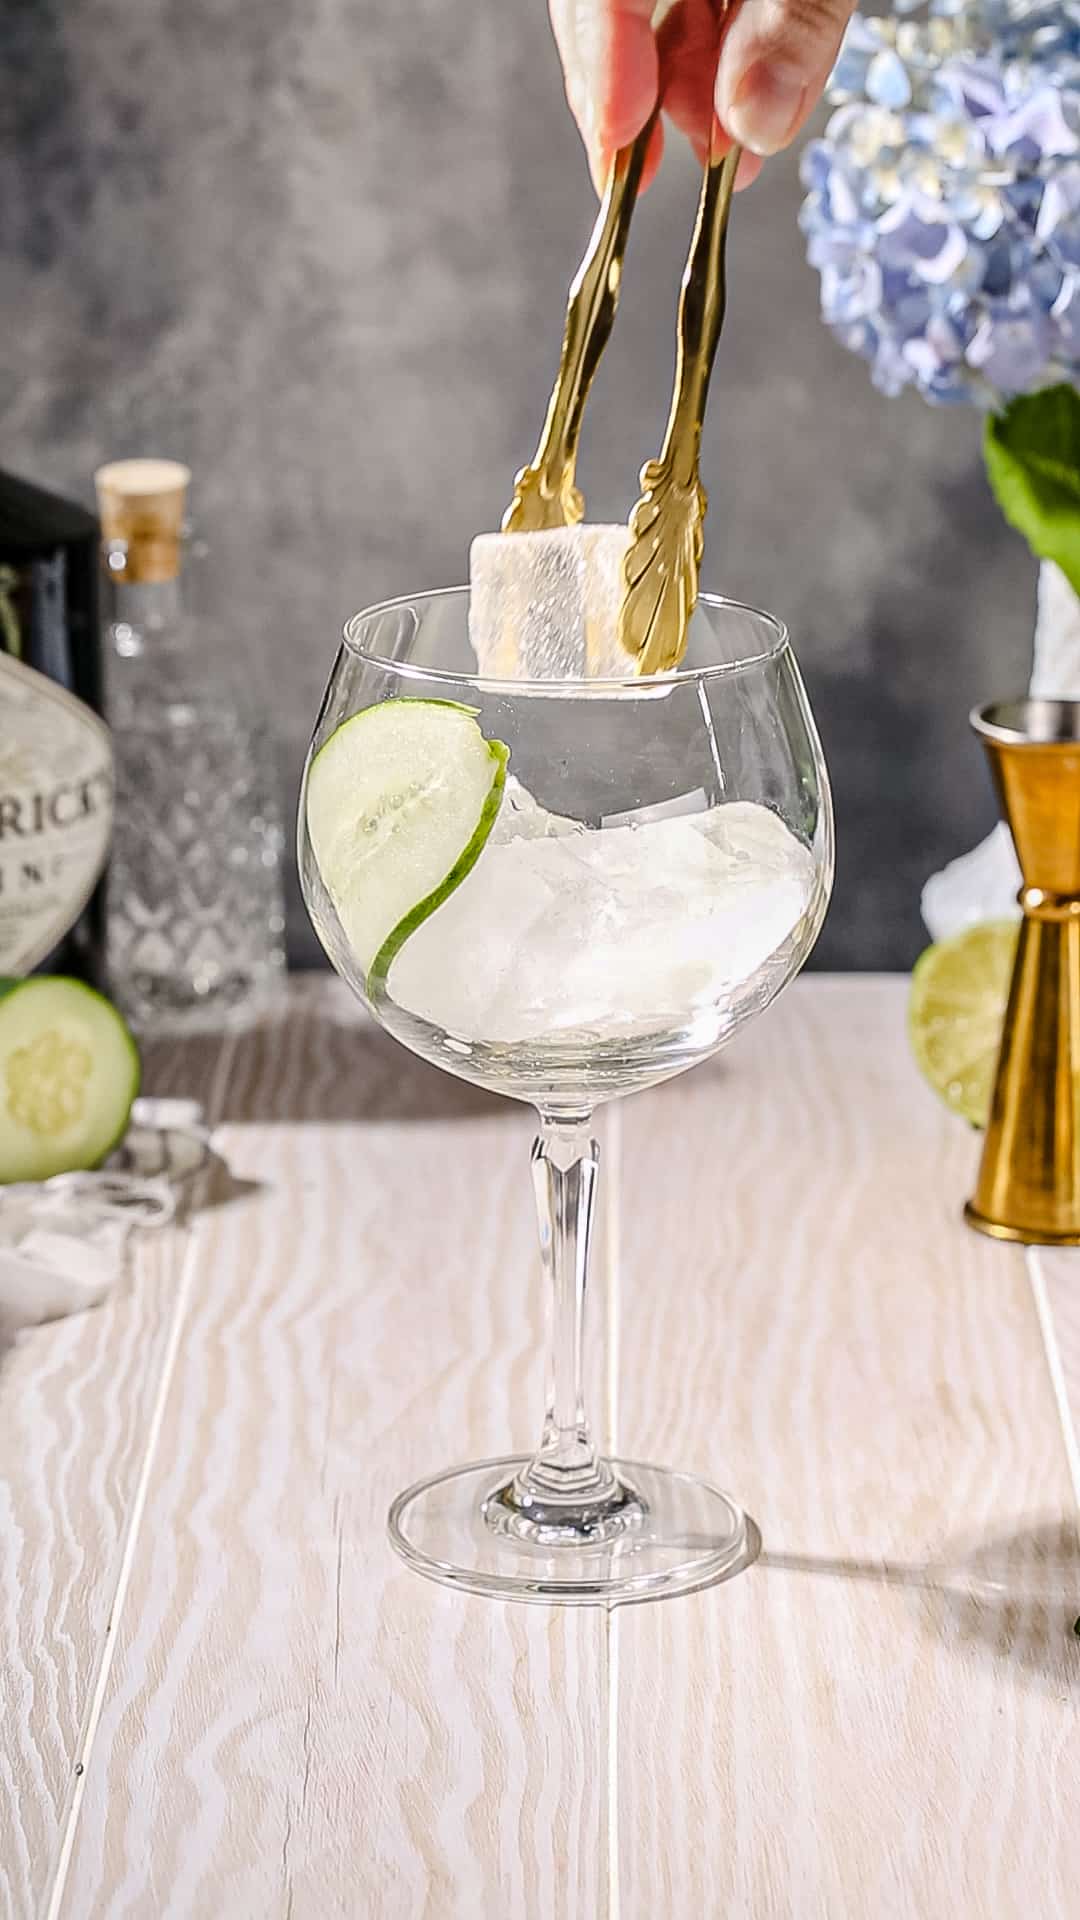 Hands using gold tongs to add a piece of ice to a cocktail glass that has a long thin slice of cucumber inside.